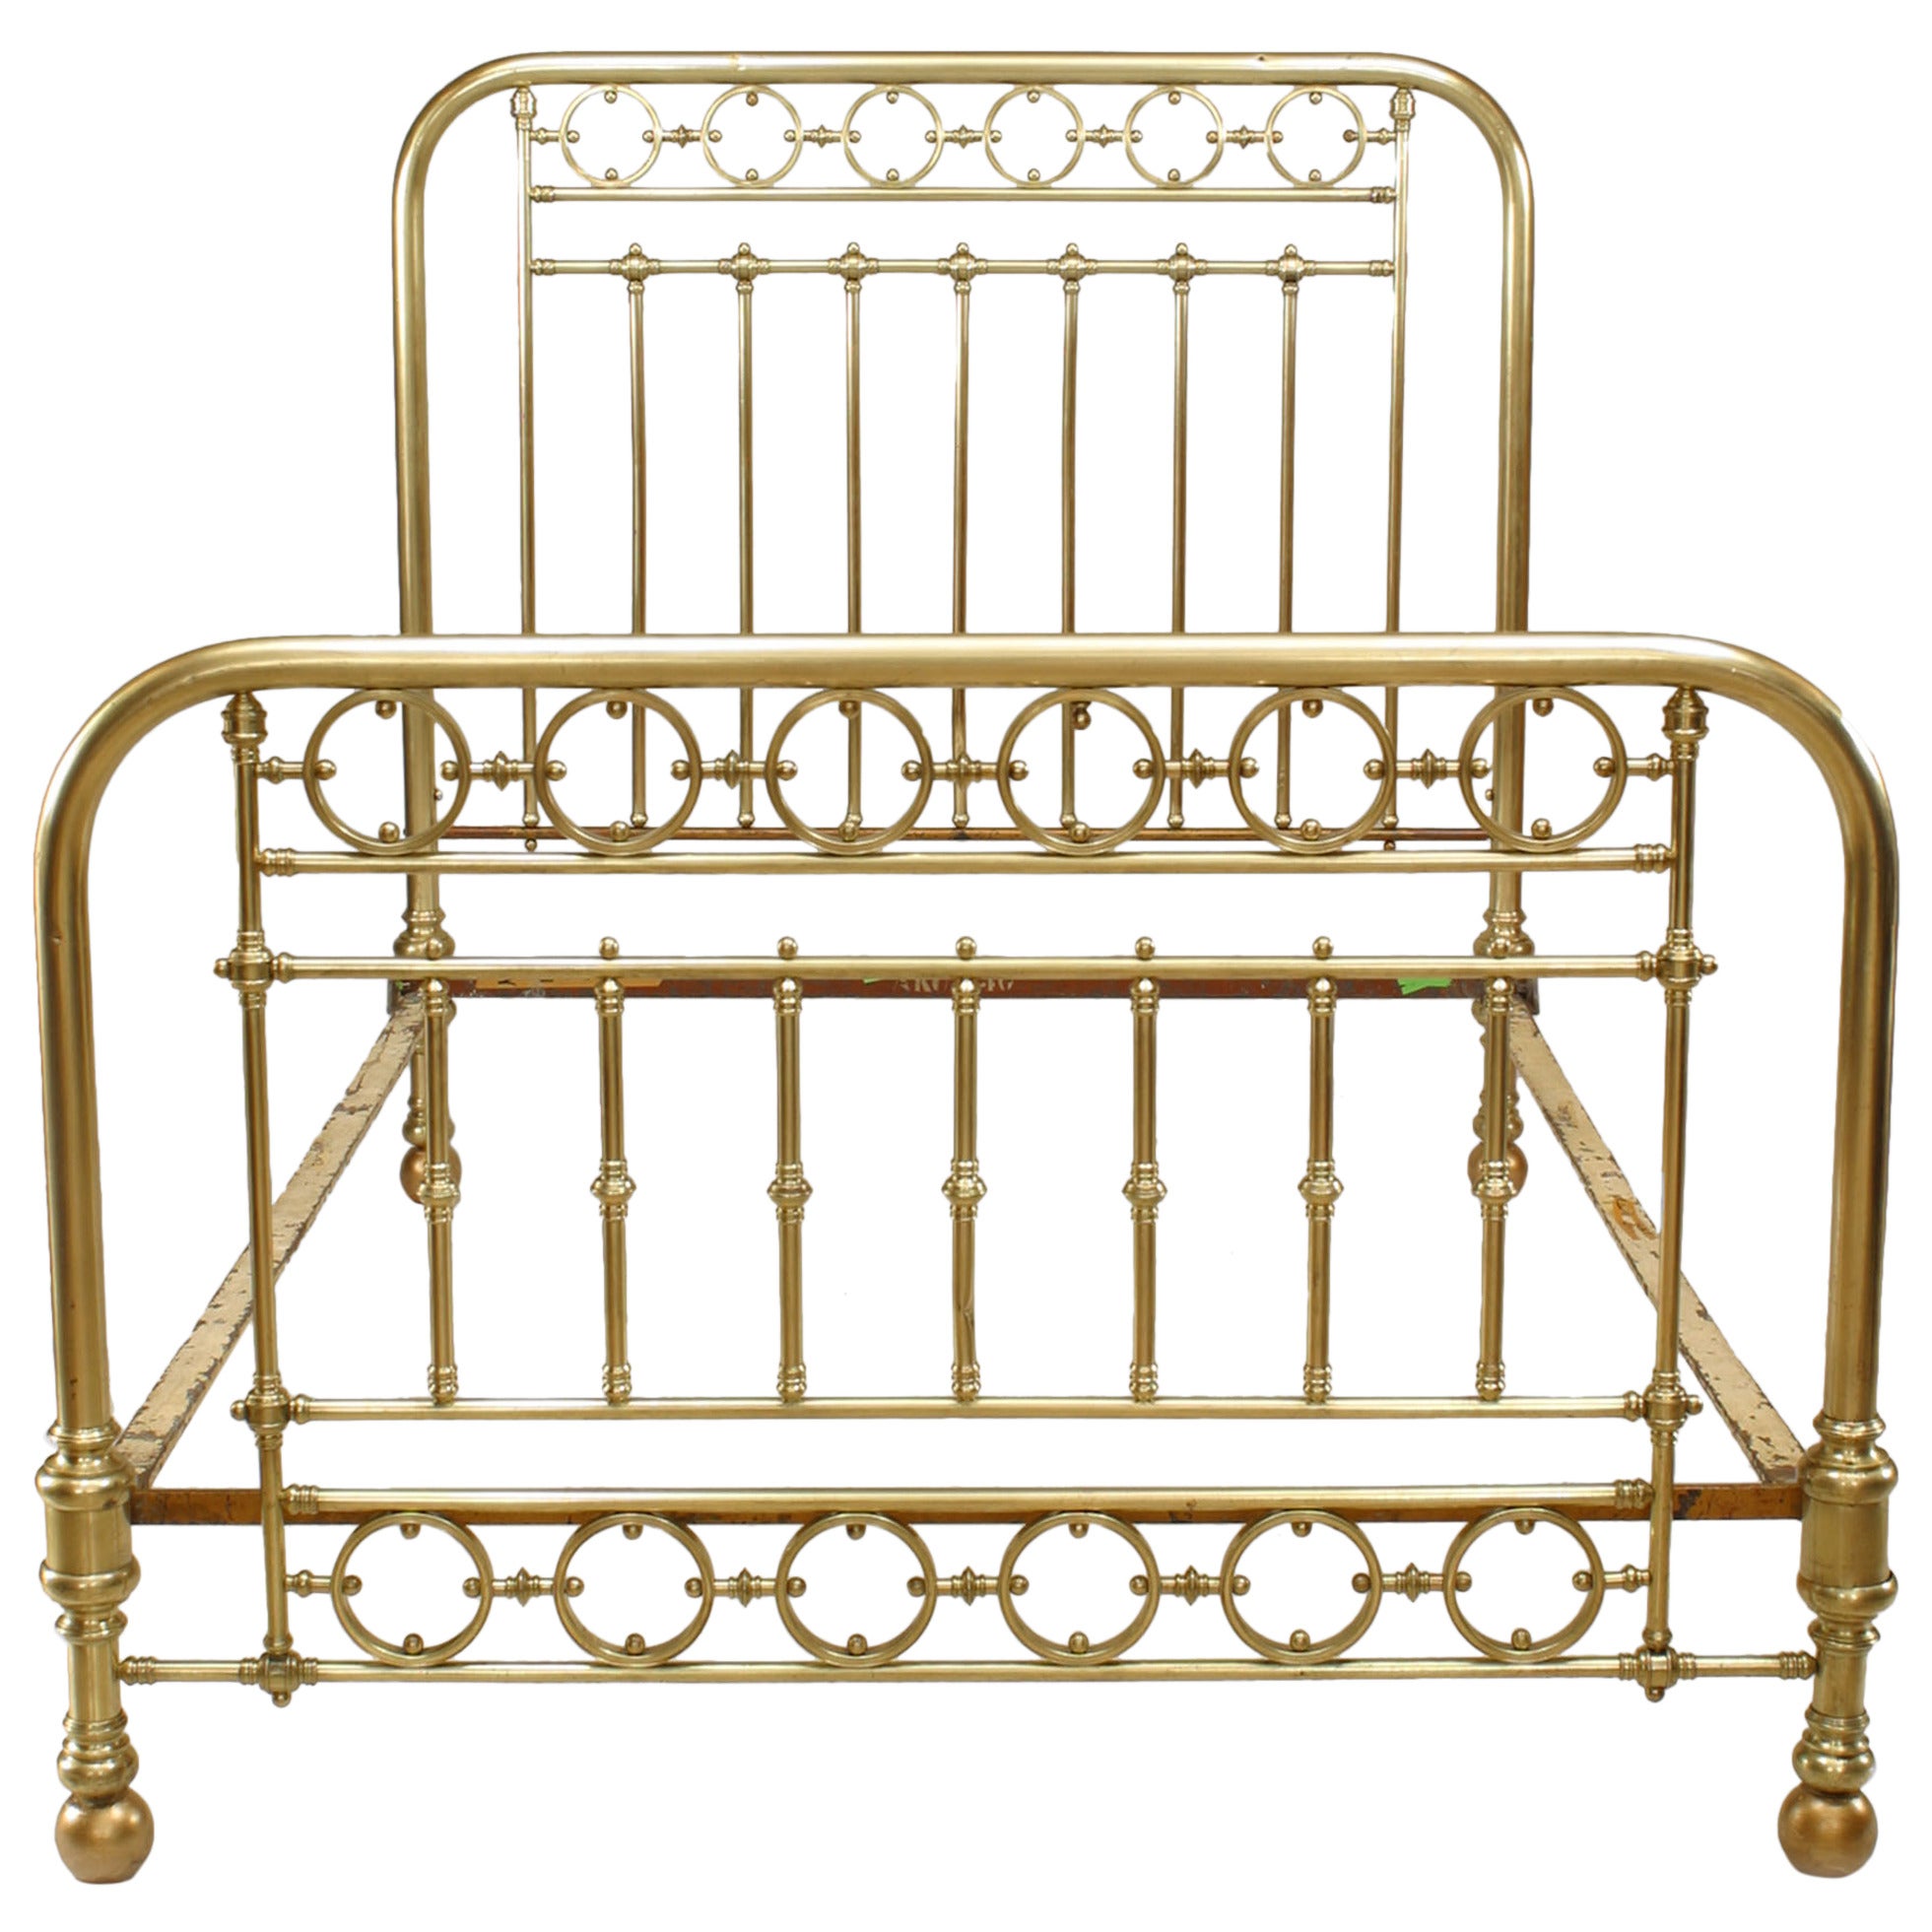 19th c. American Brass Full-Sized Spindle Bed